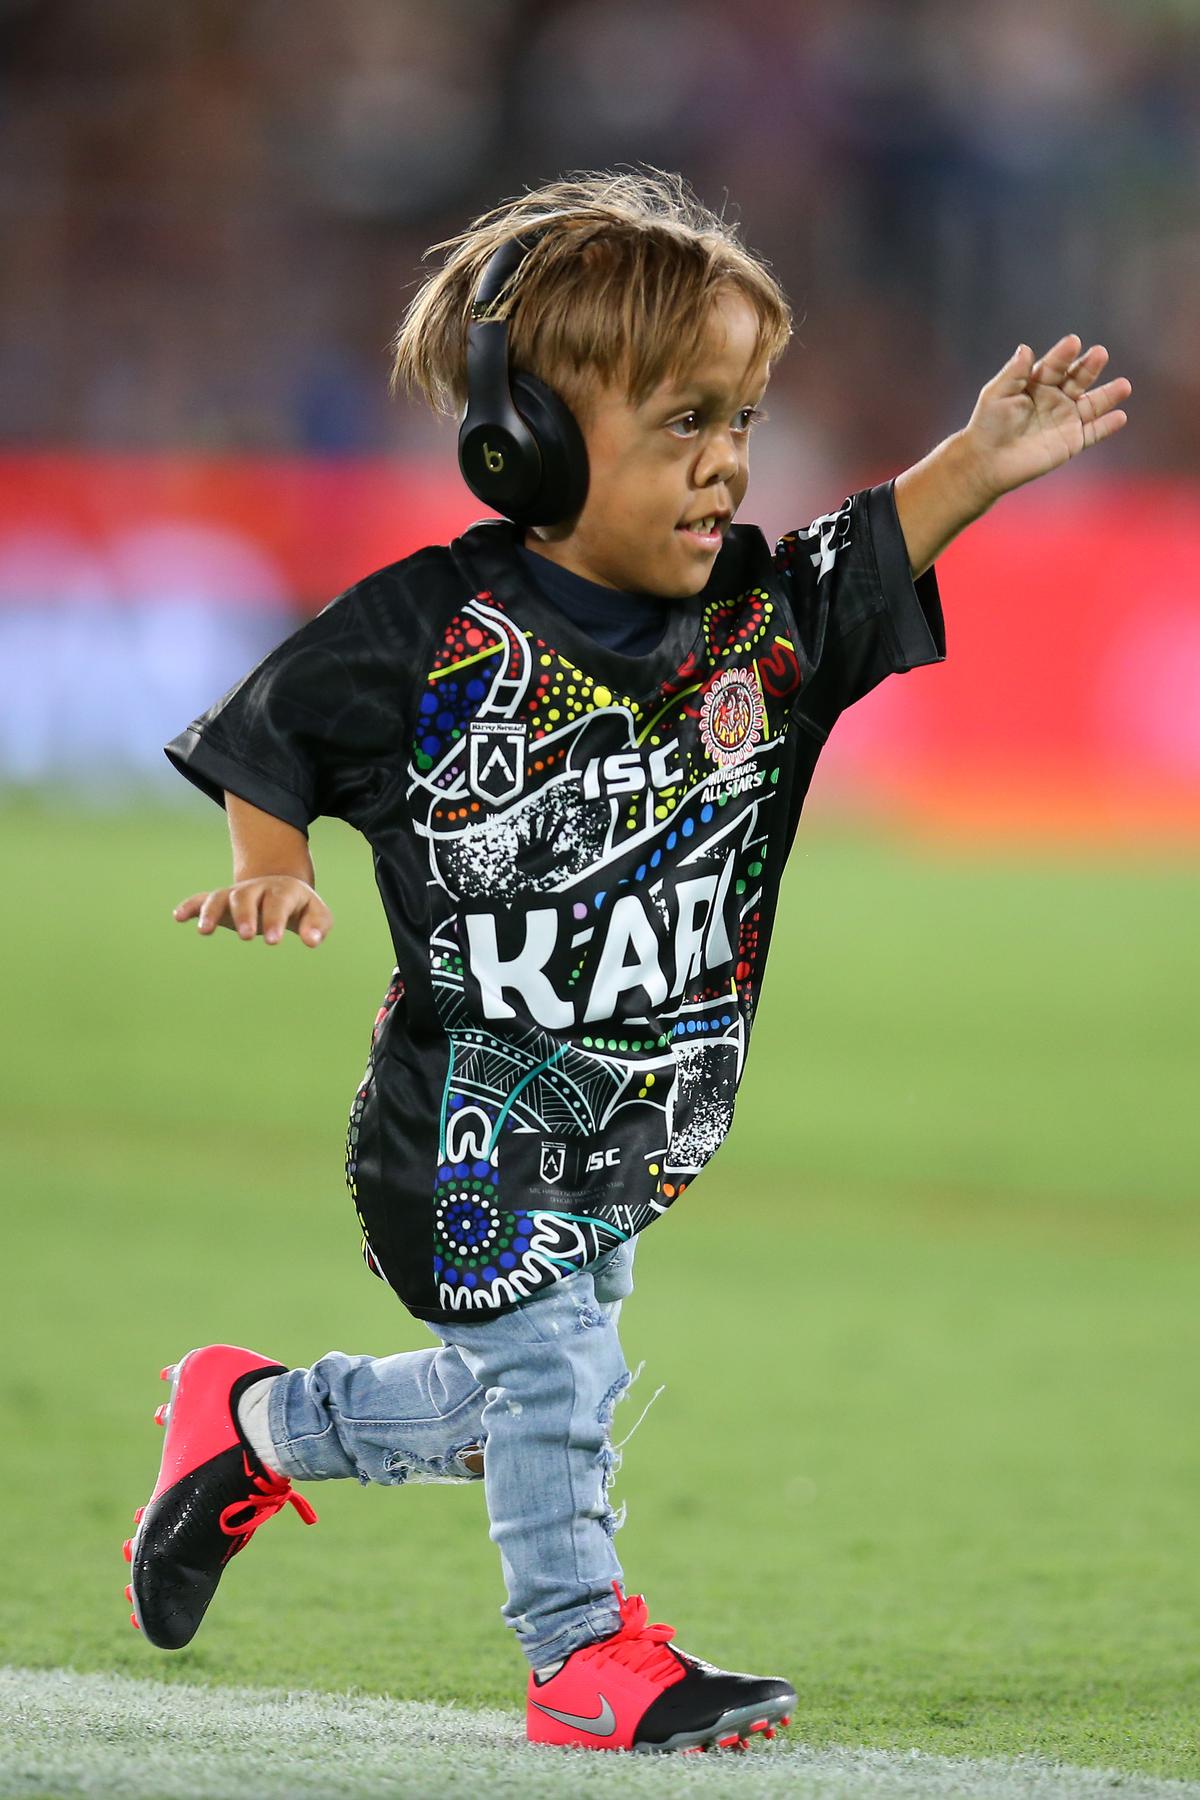 Quaden runs onto the field before the NRL match at Cbus Super Stadium on Feb. 22, 2020. (©Getty Images | <a href="https://www.gettyimages.com/detail/news-photo/quaden-bayles-runs-onto-the-field-before-the-nrl-match-news-photo/1207909862?adppopup=true">Jason McCawley</a>)